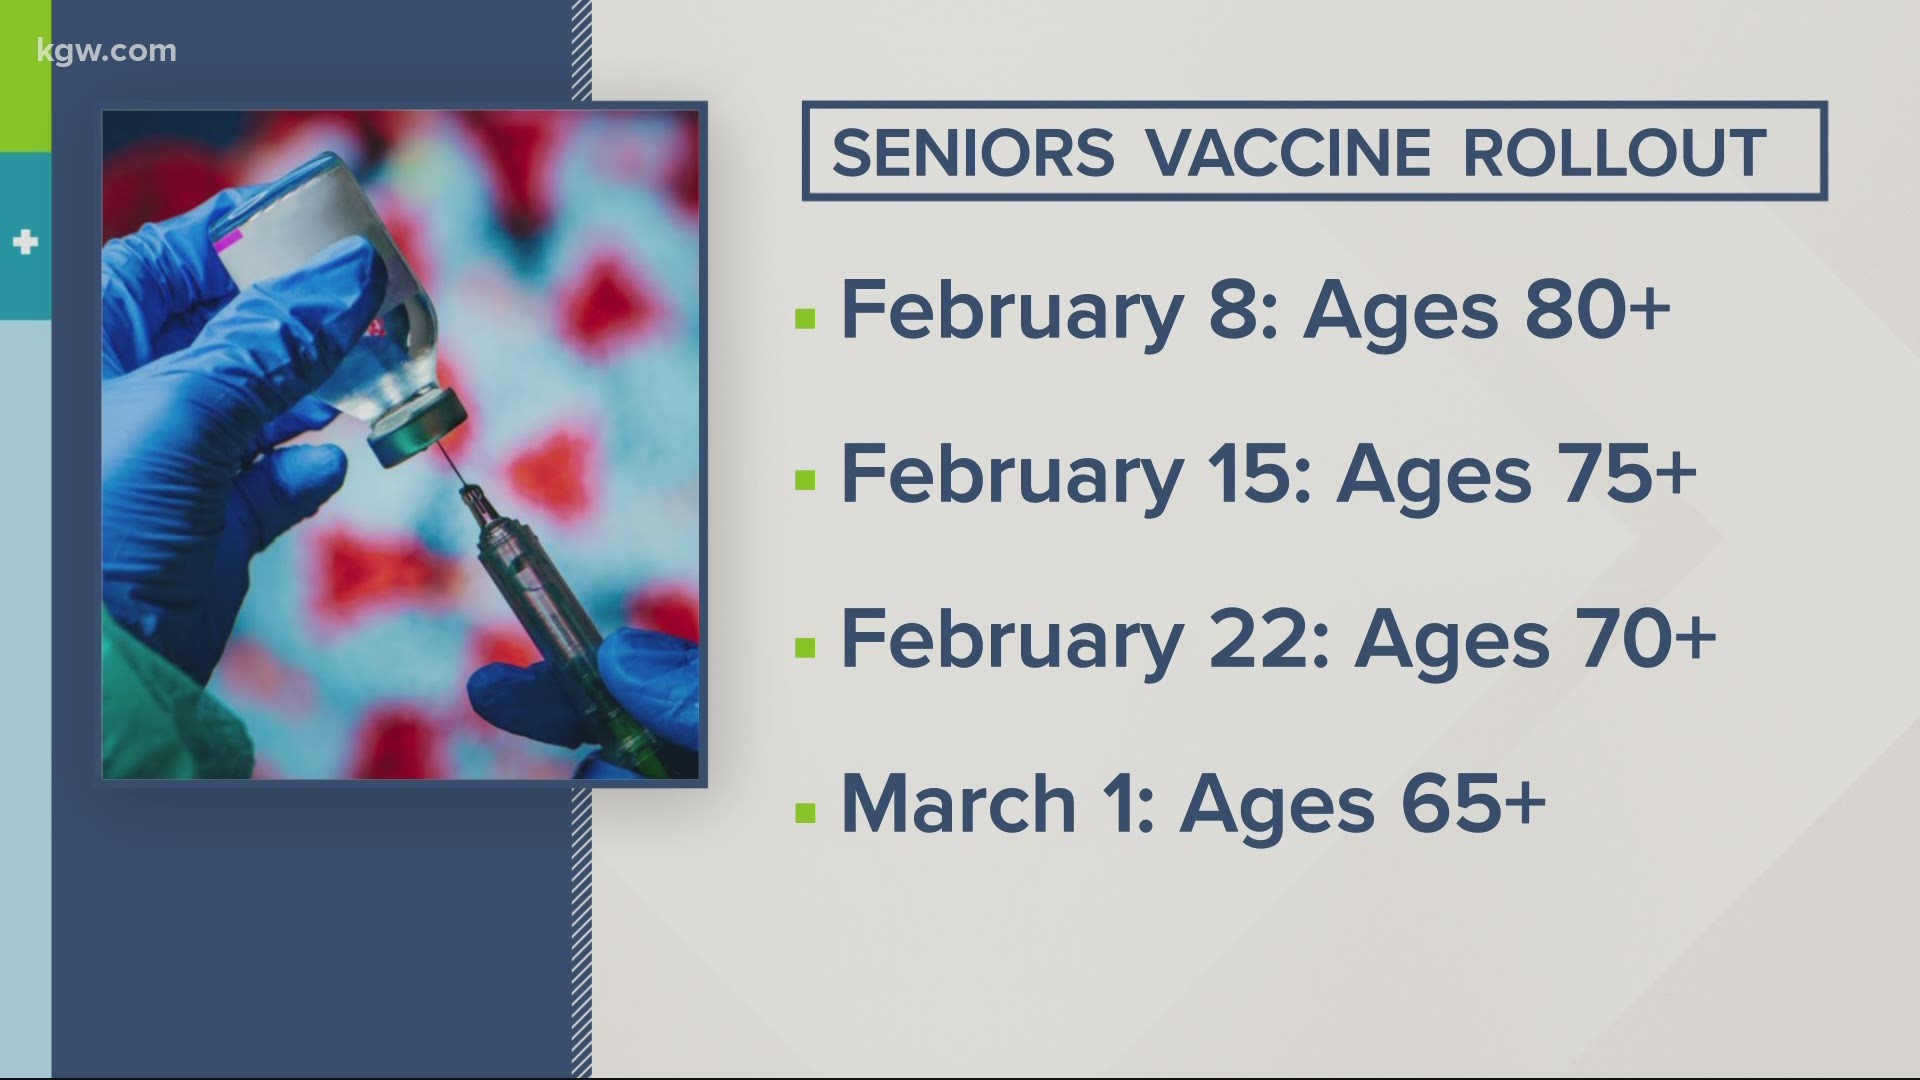 Starting Monday, Feb. 22, Oregonians 70 and older become eligible to receive the COVID-19 vaccine. KGW's Bryant Clerkley has more on how to sign up.